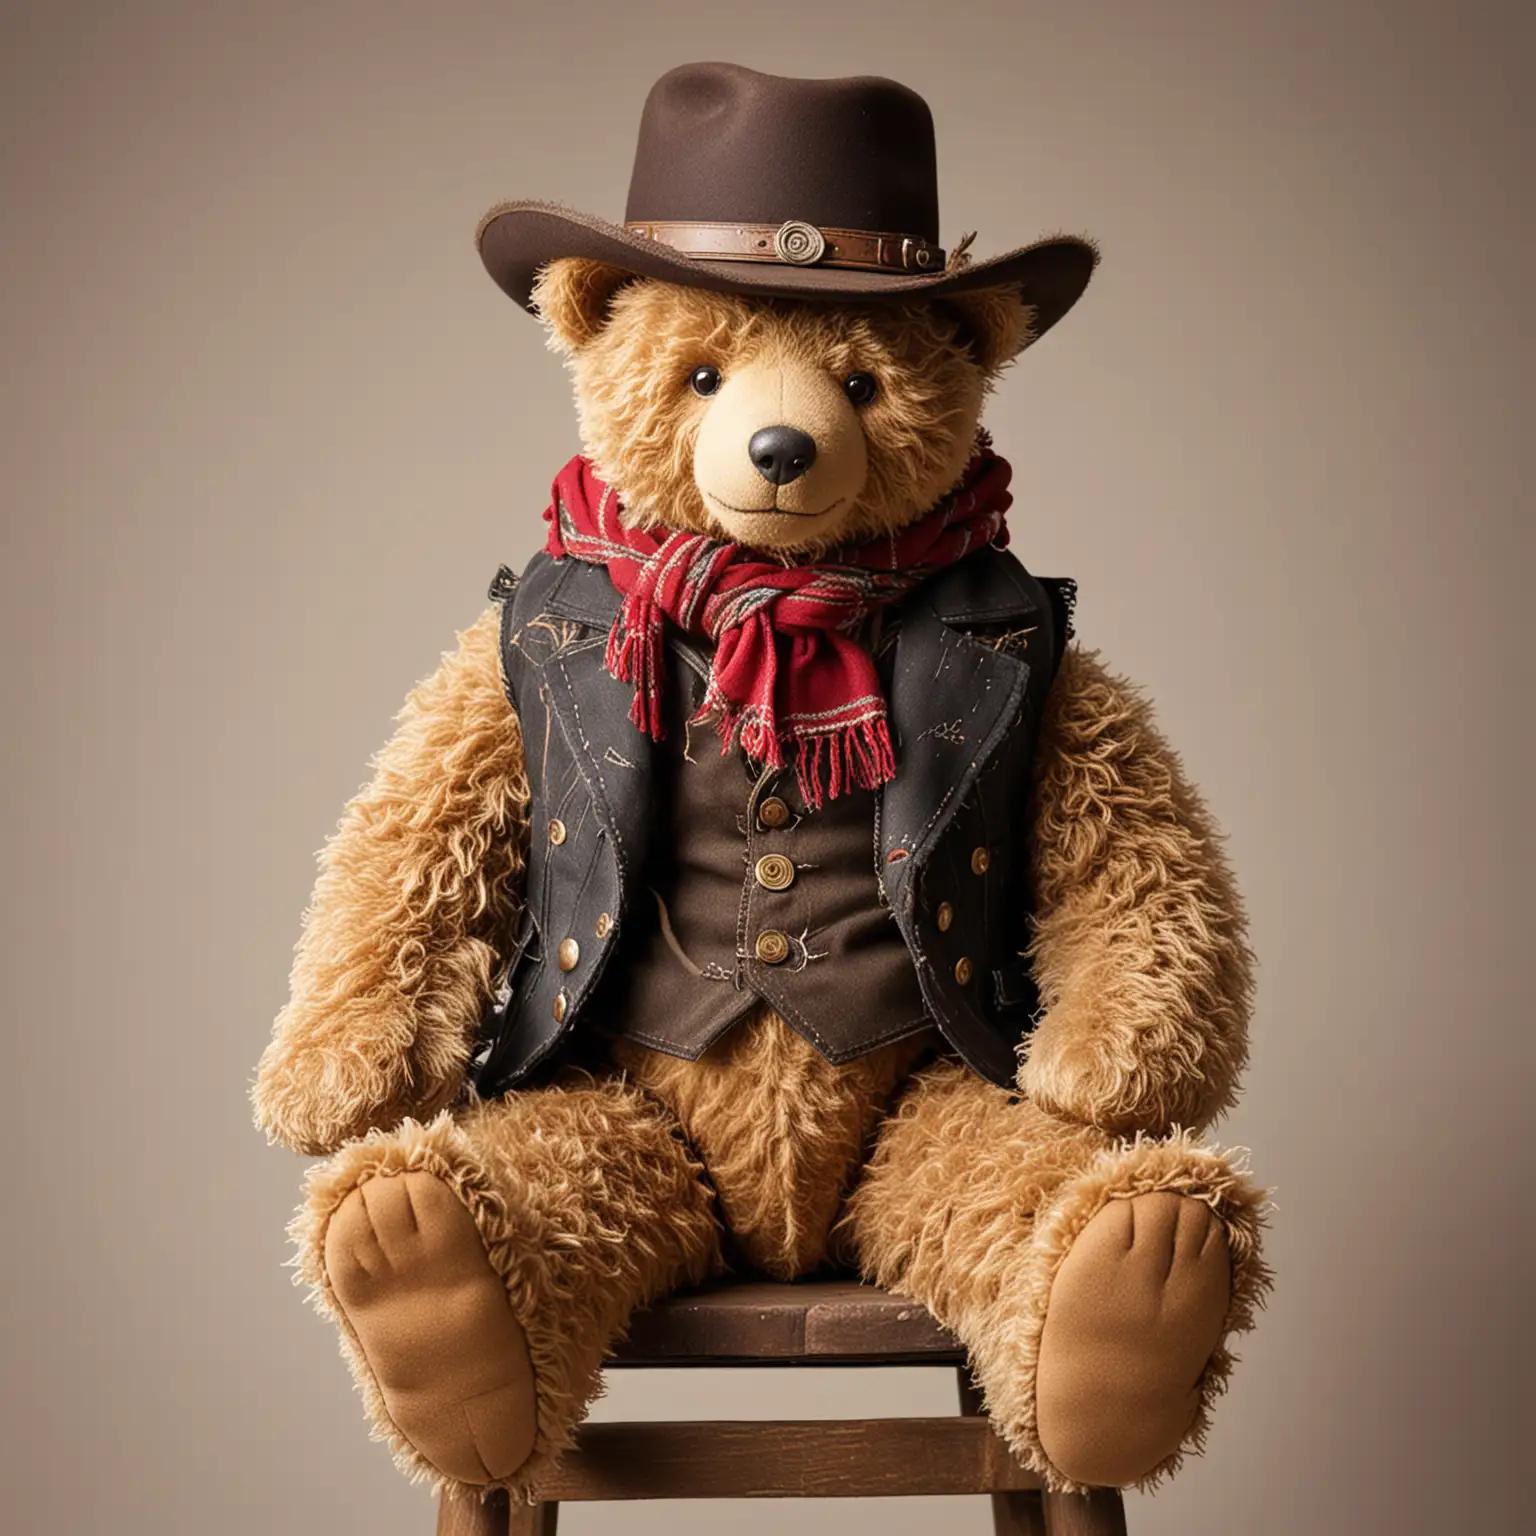 Battered old vintage Teddy Bear Gunslingers, sitting on a stool, dressed as a cowboy with hat, scarf, waistcoat, blank background